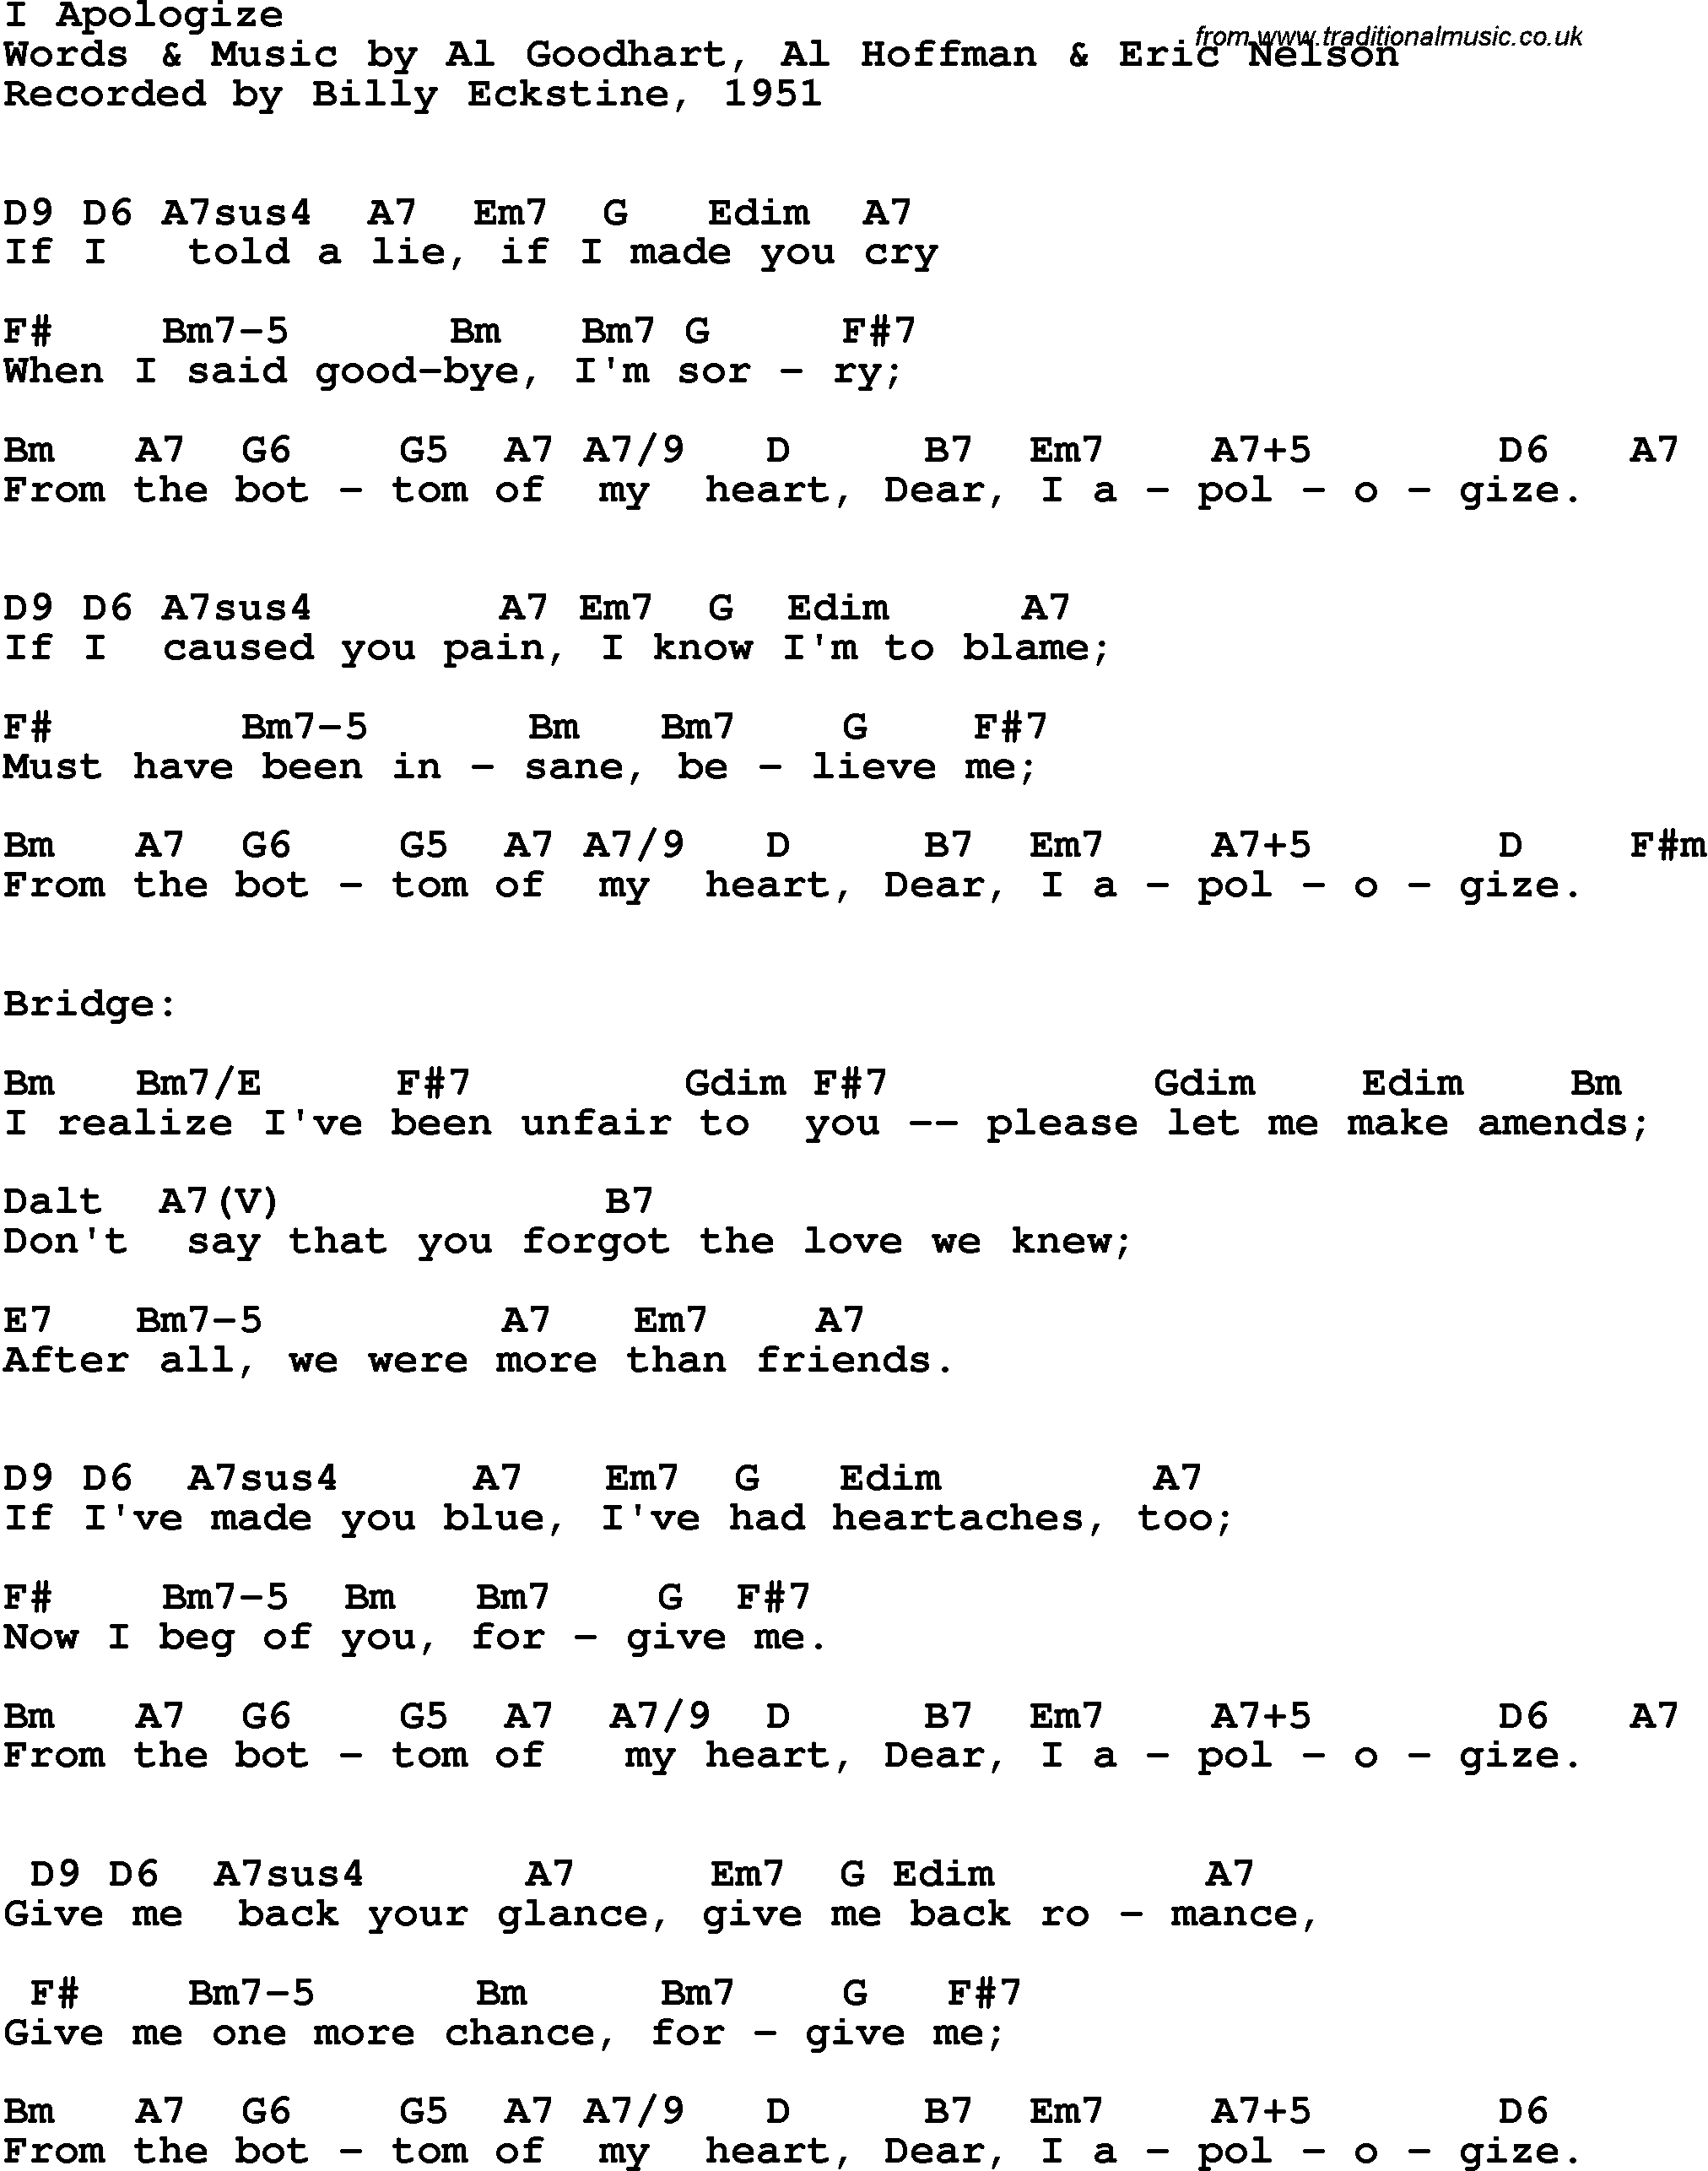 Song Lyrics with guitar chords for I Apologize - Billy Eckstine, 1951